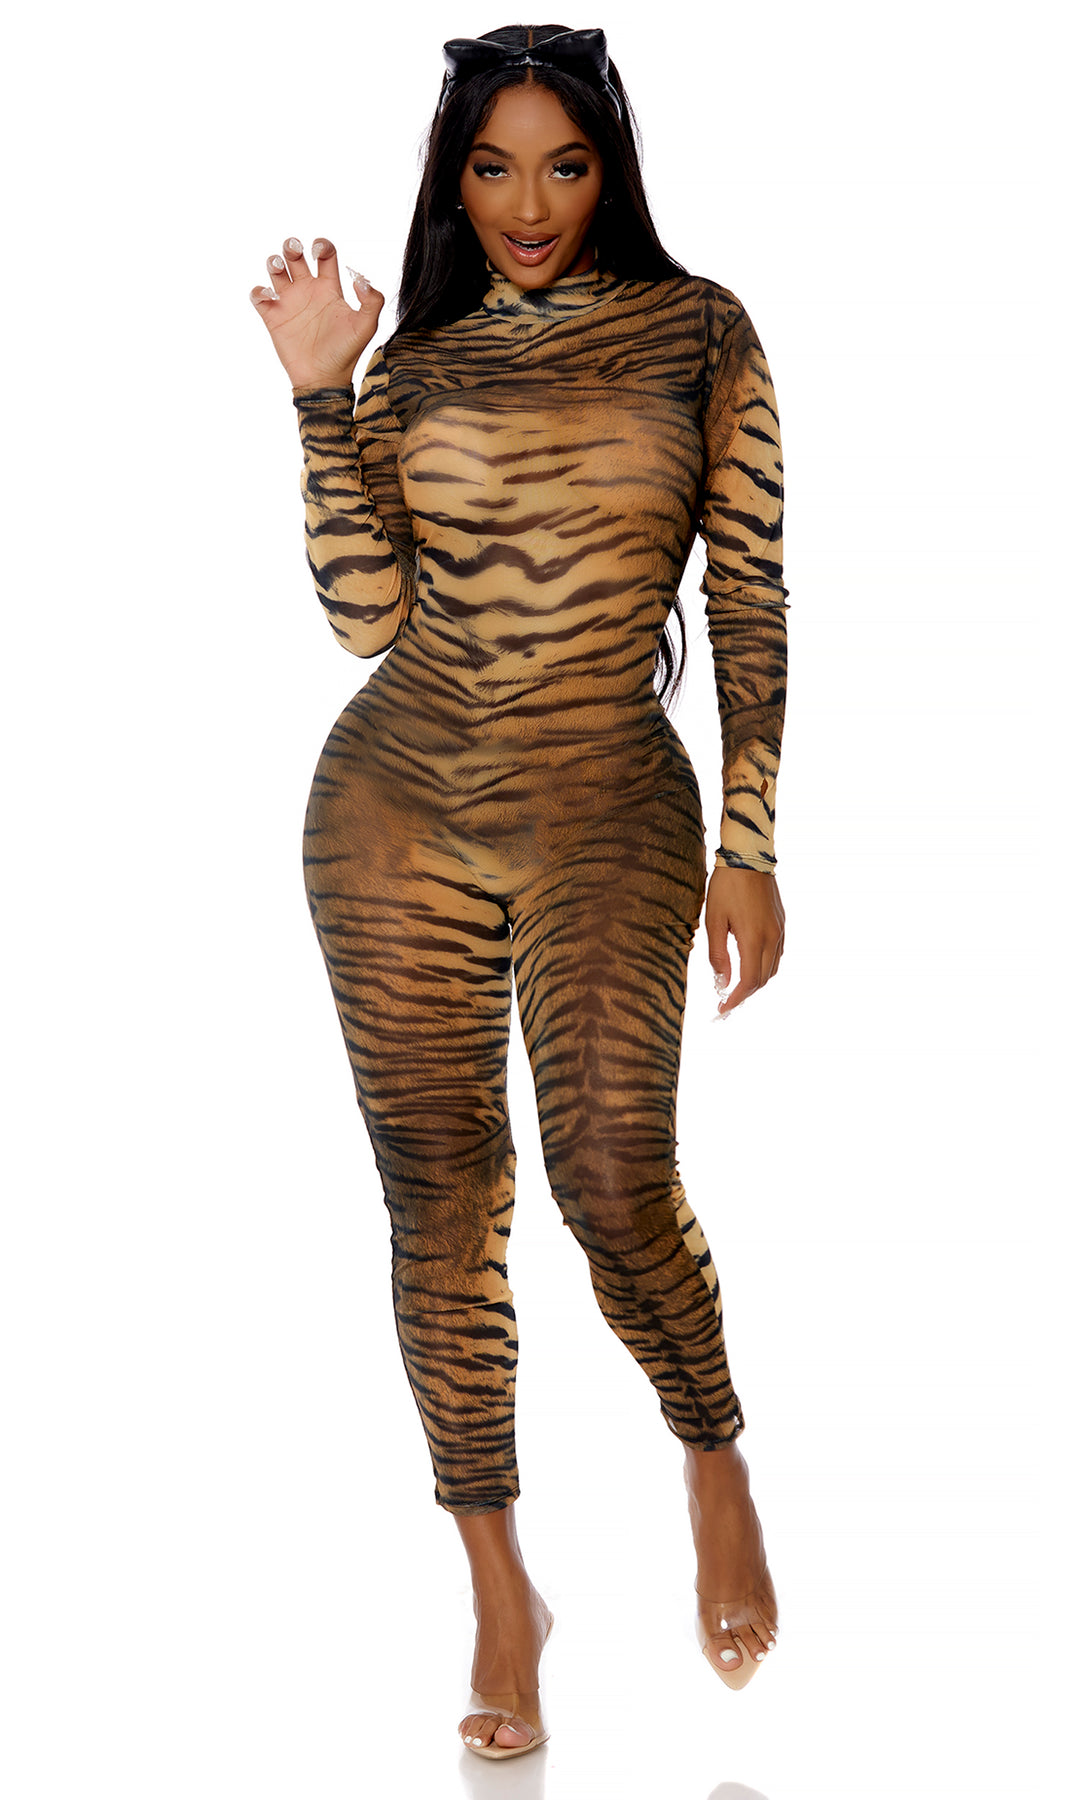 Can't Be Tamed Sexy Tiger Costume